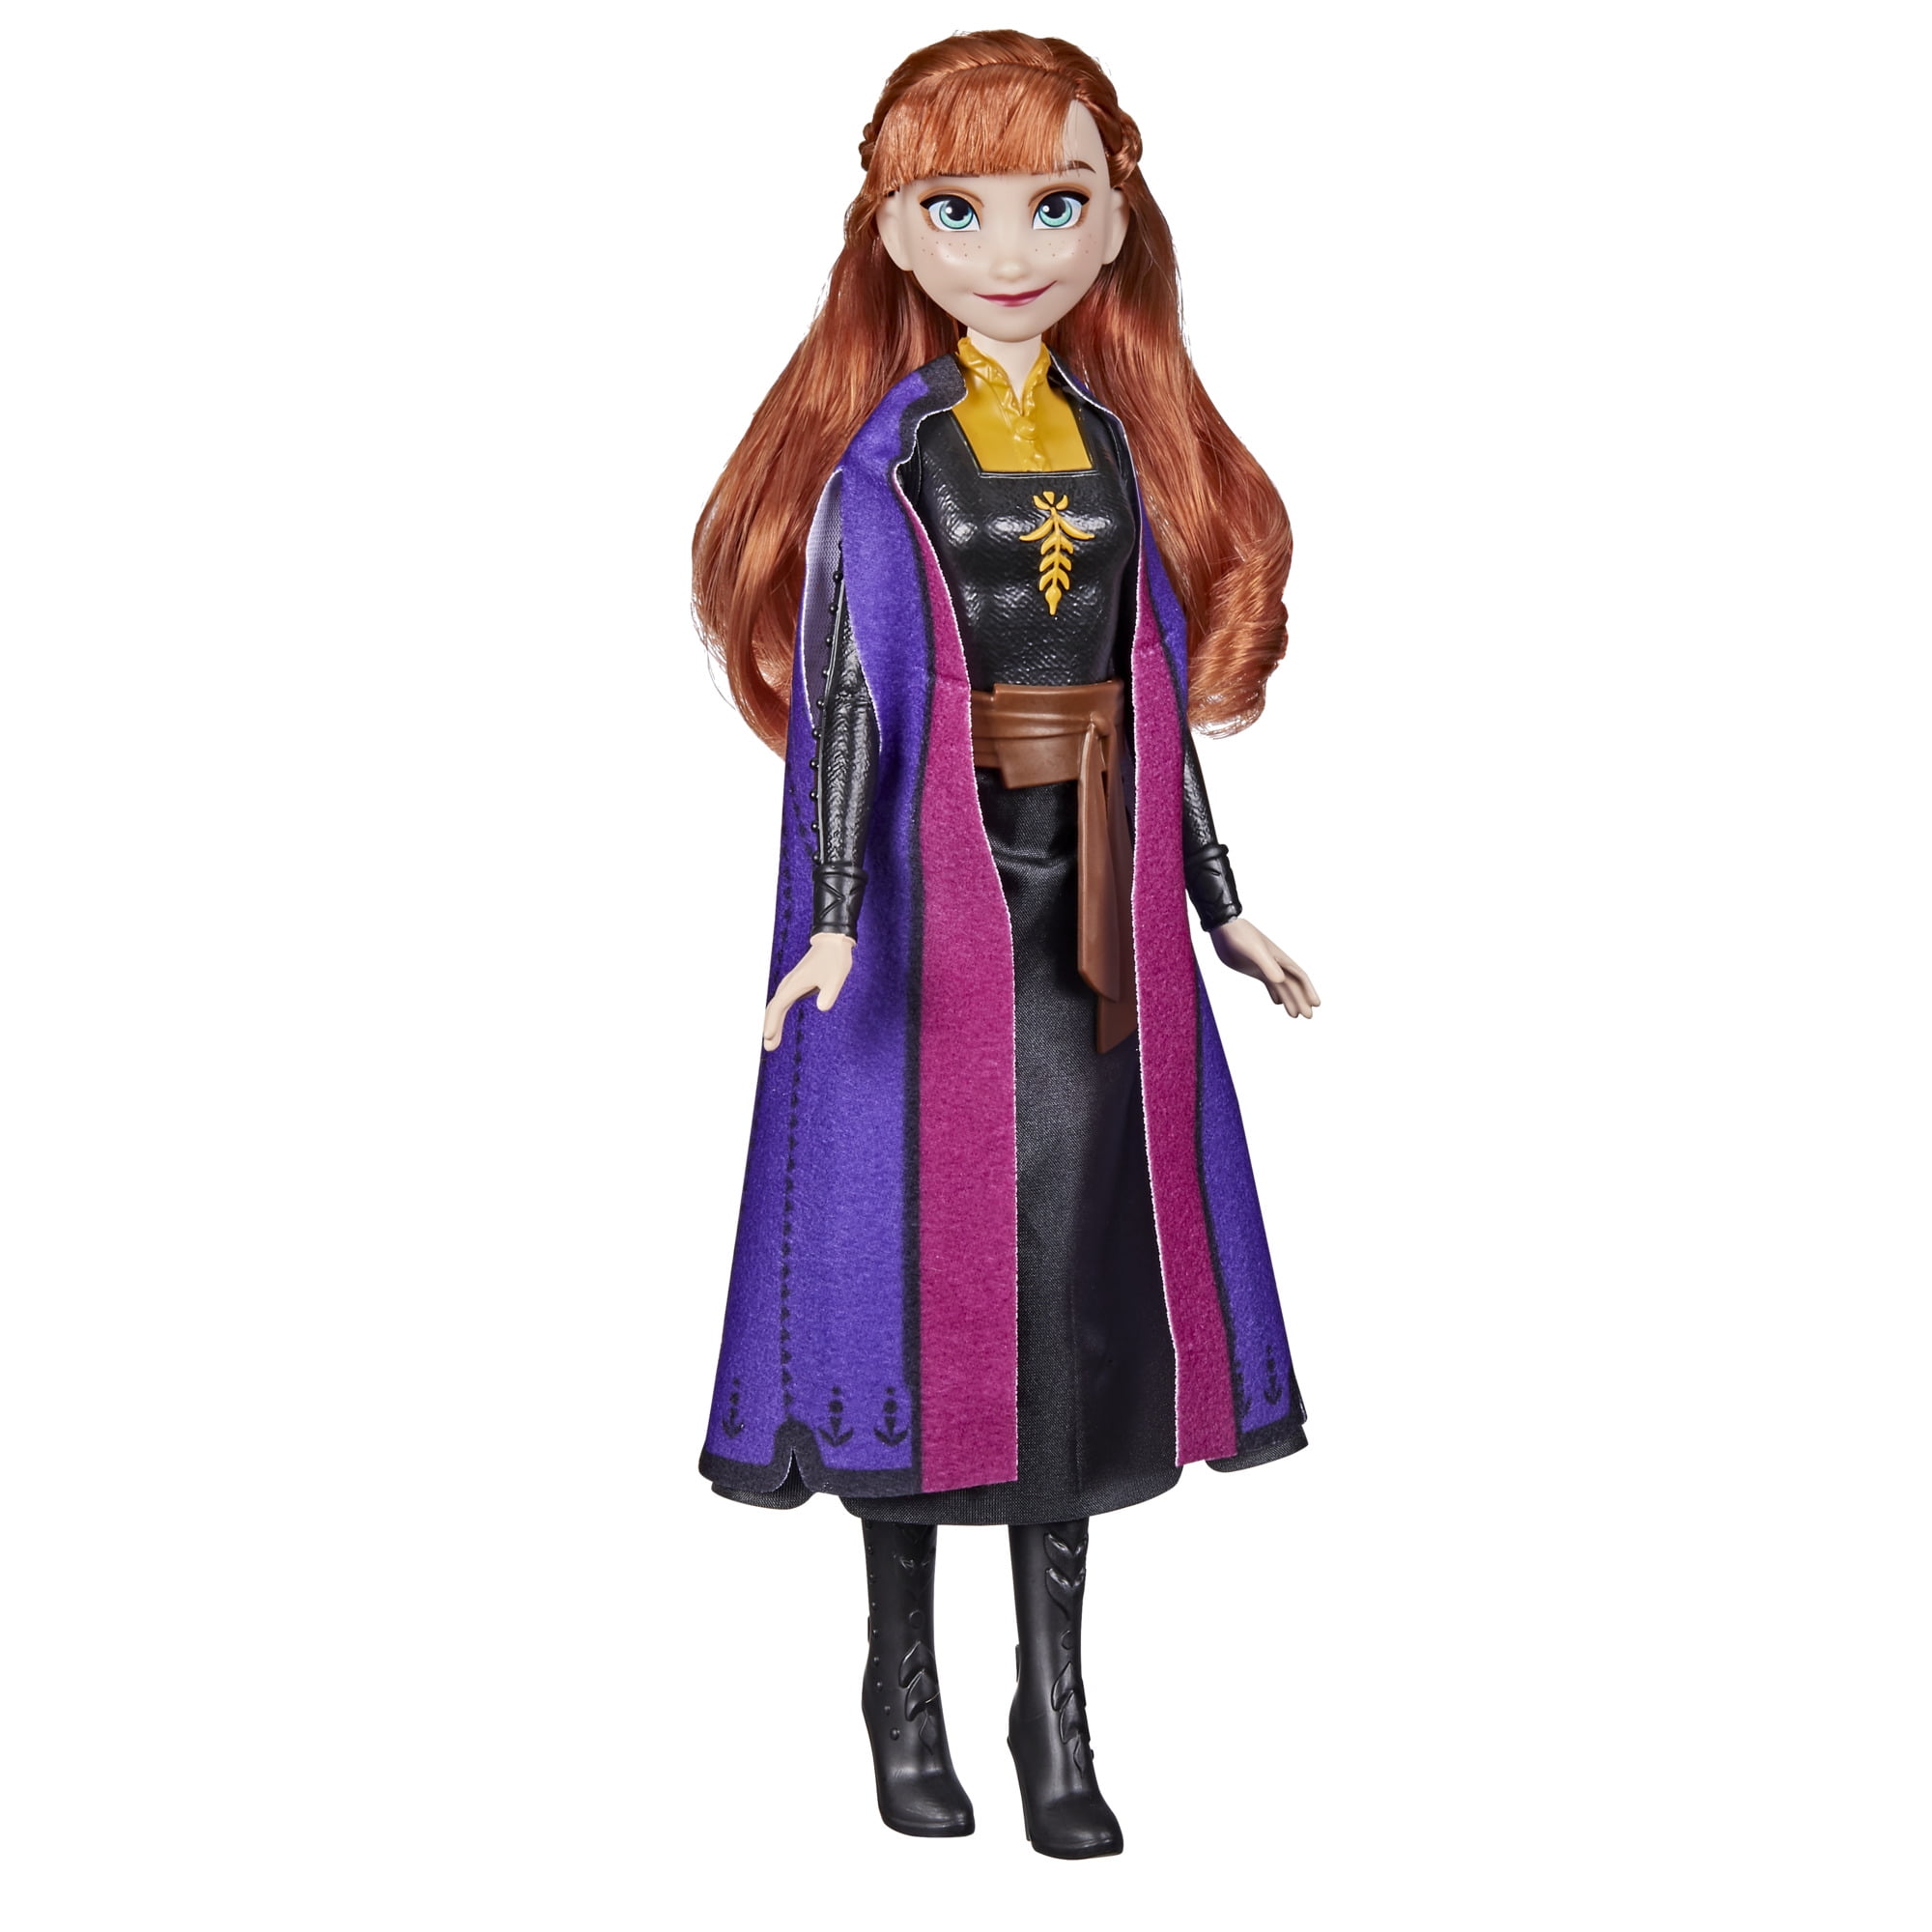 Disney Frozen Anna Fashion Doll With Long Red Hair and Outfit Nylon/a 